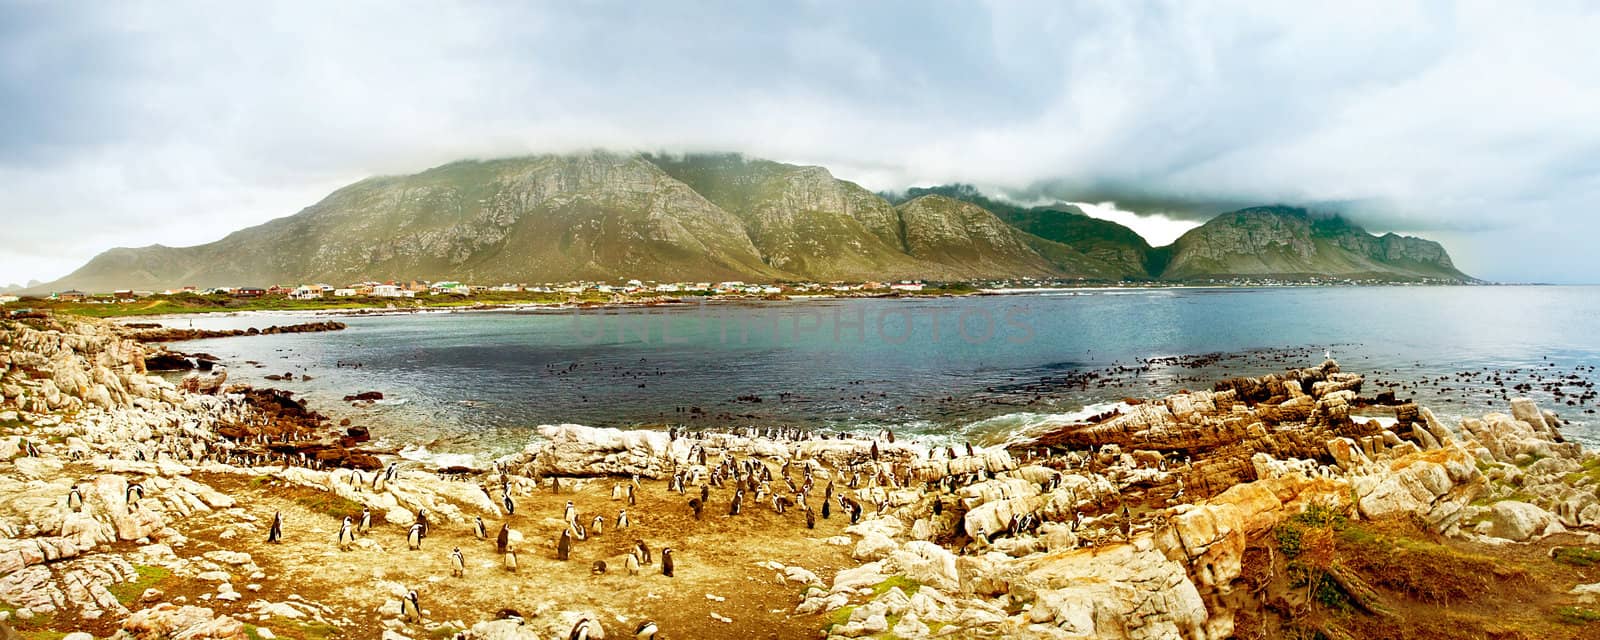 Panoramic landscape with penguins by Anna_Omelchenko